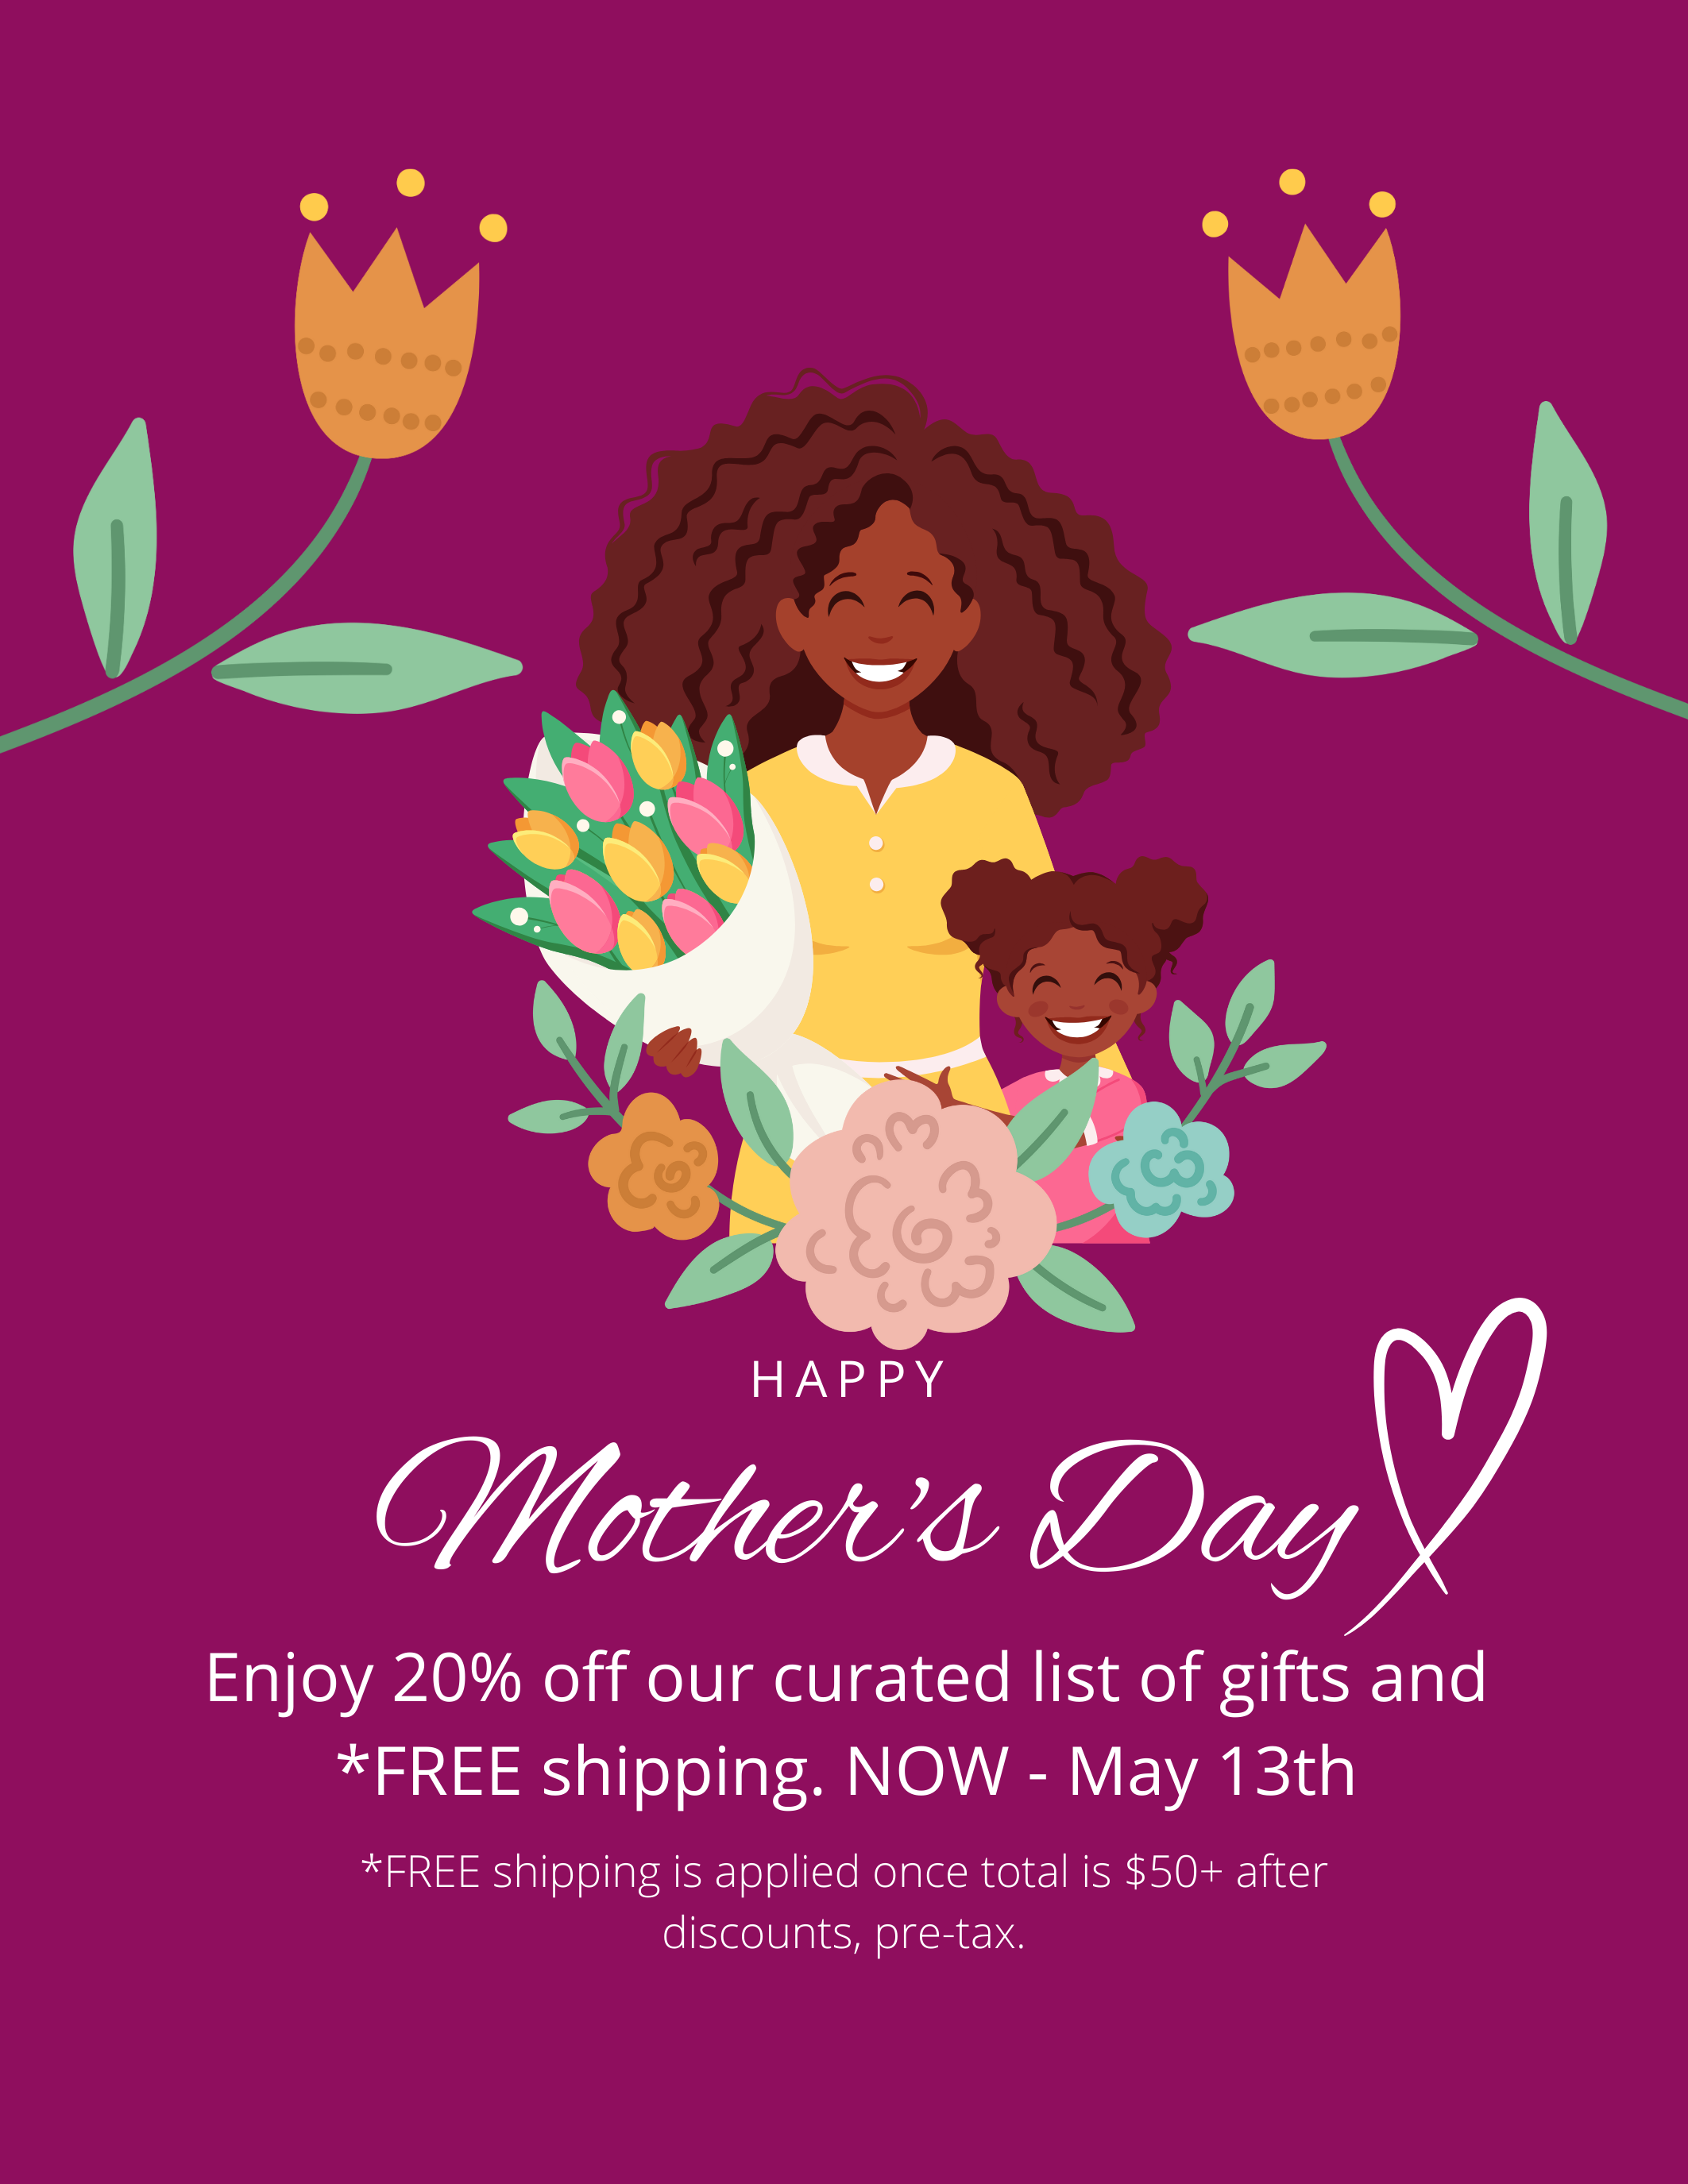 Enjoy 20% off curated gift ideas for mothers day